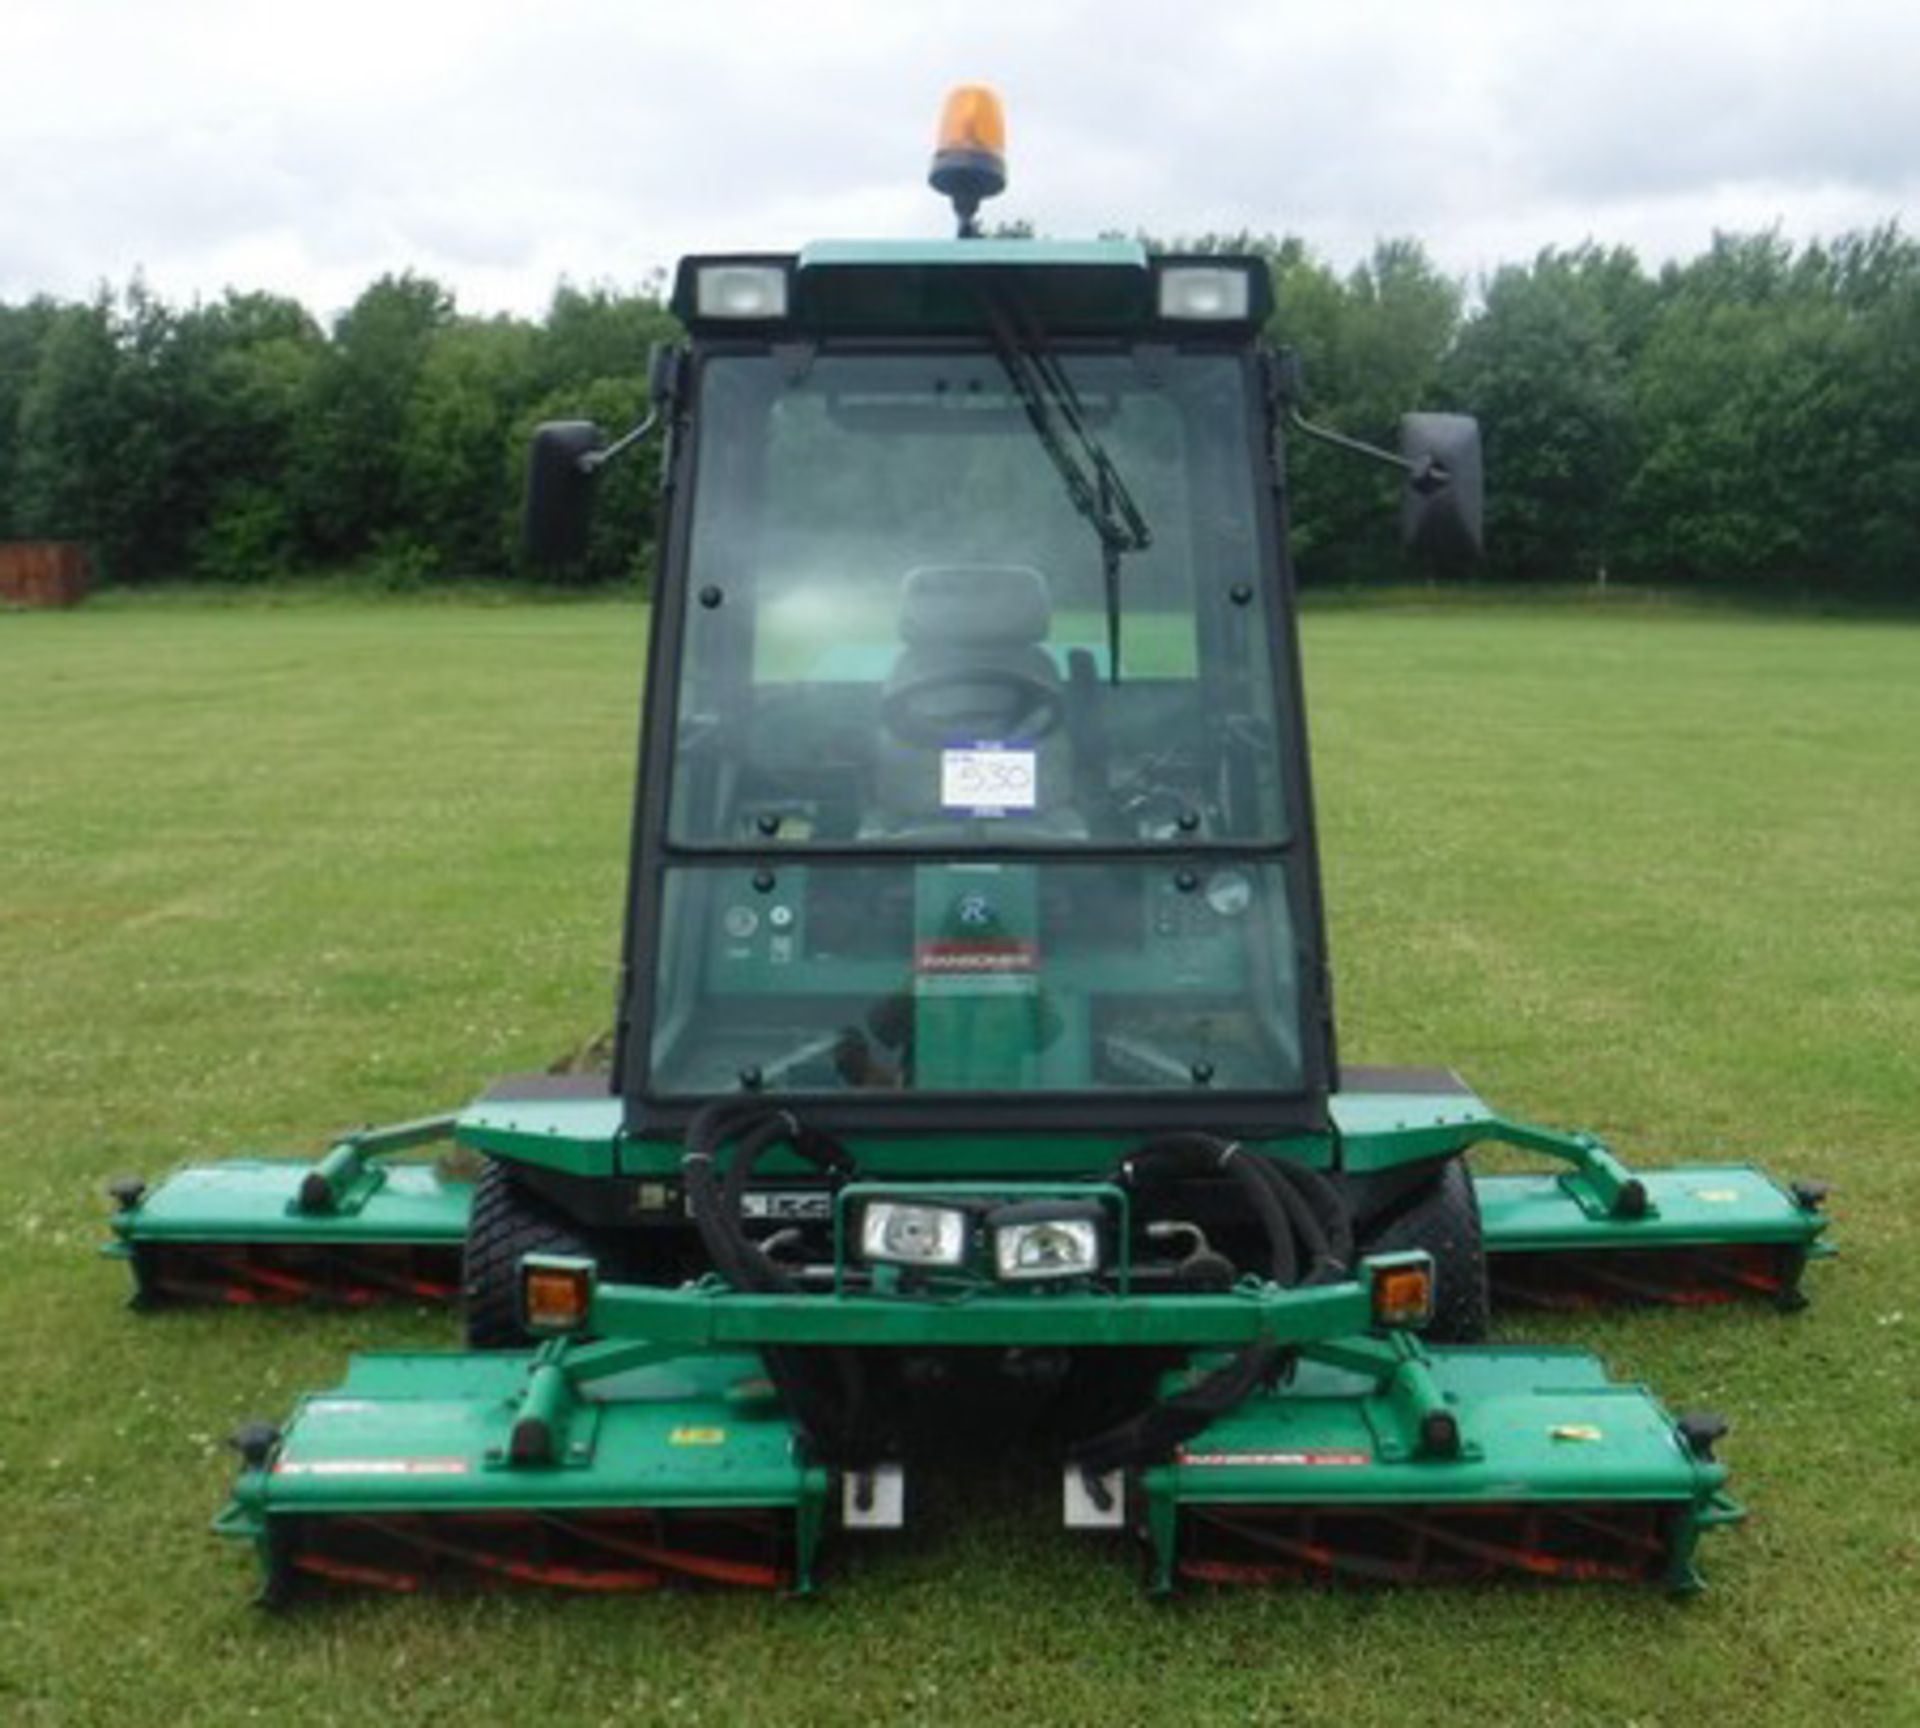 2003 RANSOMES ride on mower. Reg - SN03HLD. 4407hrs (correct)